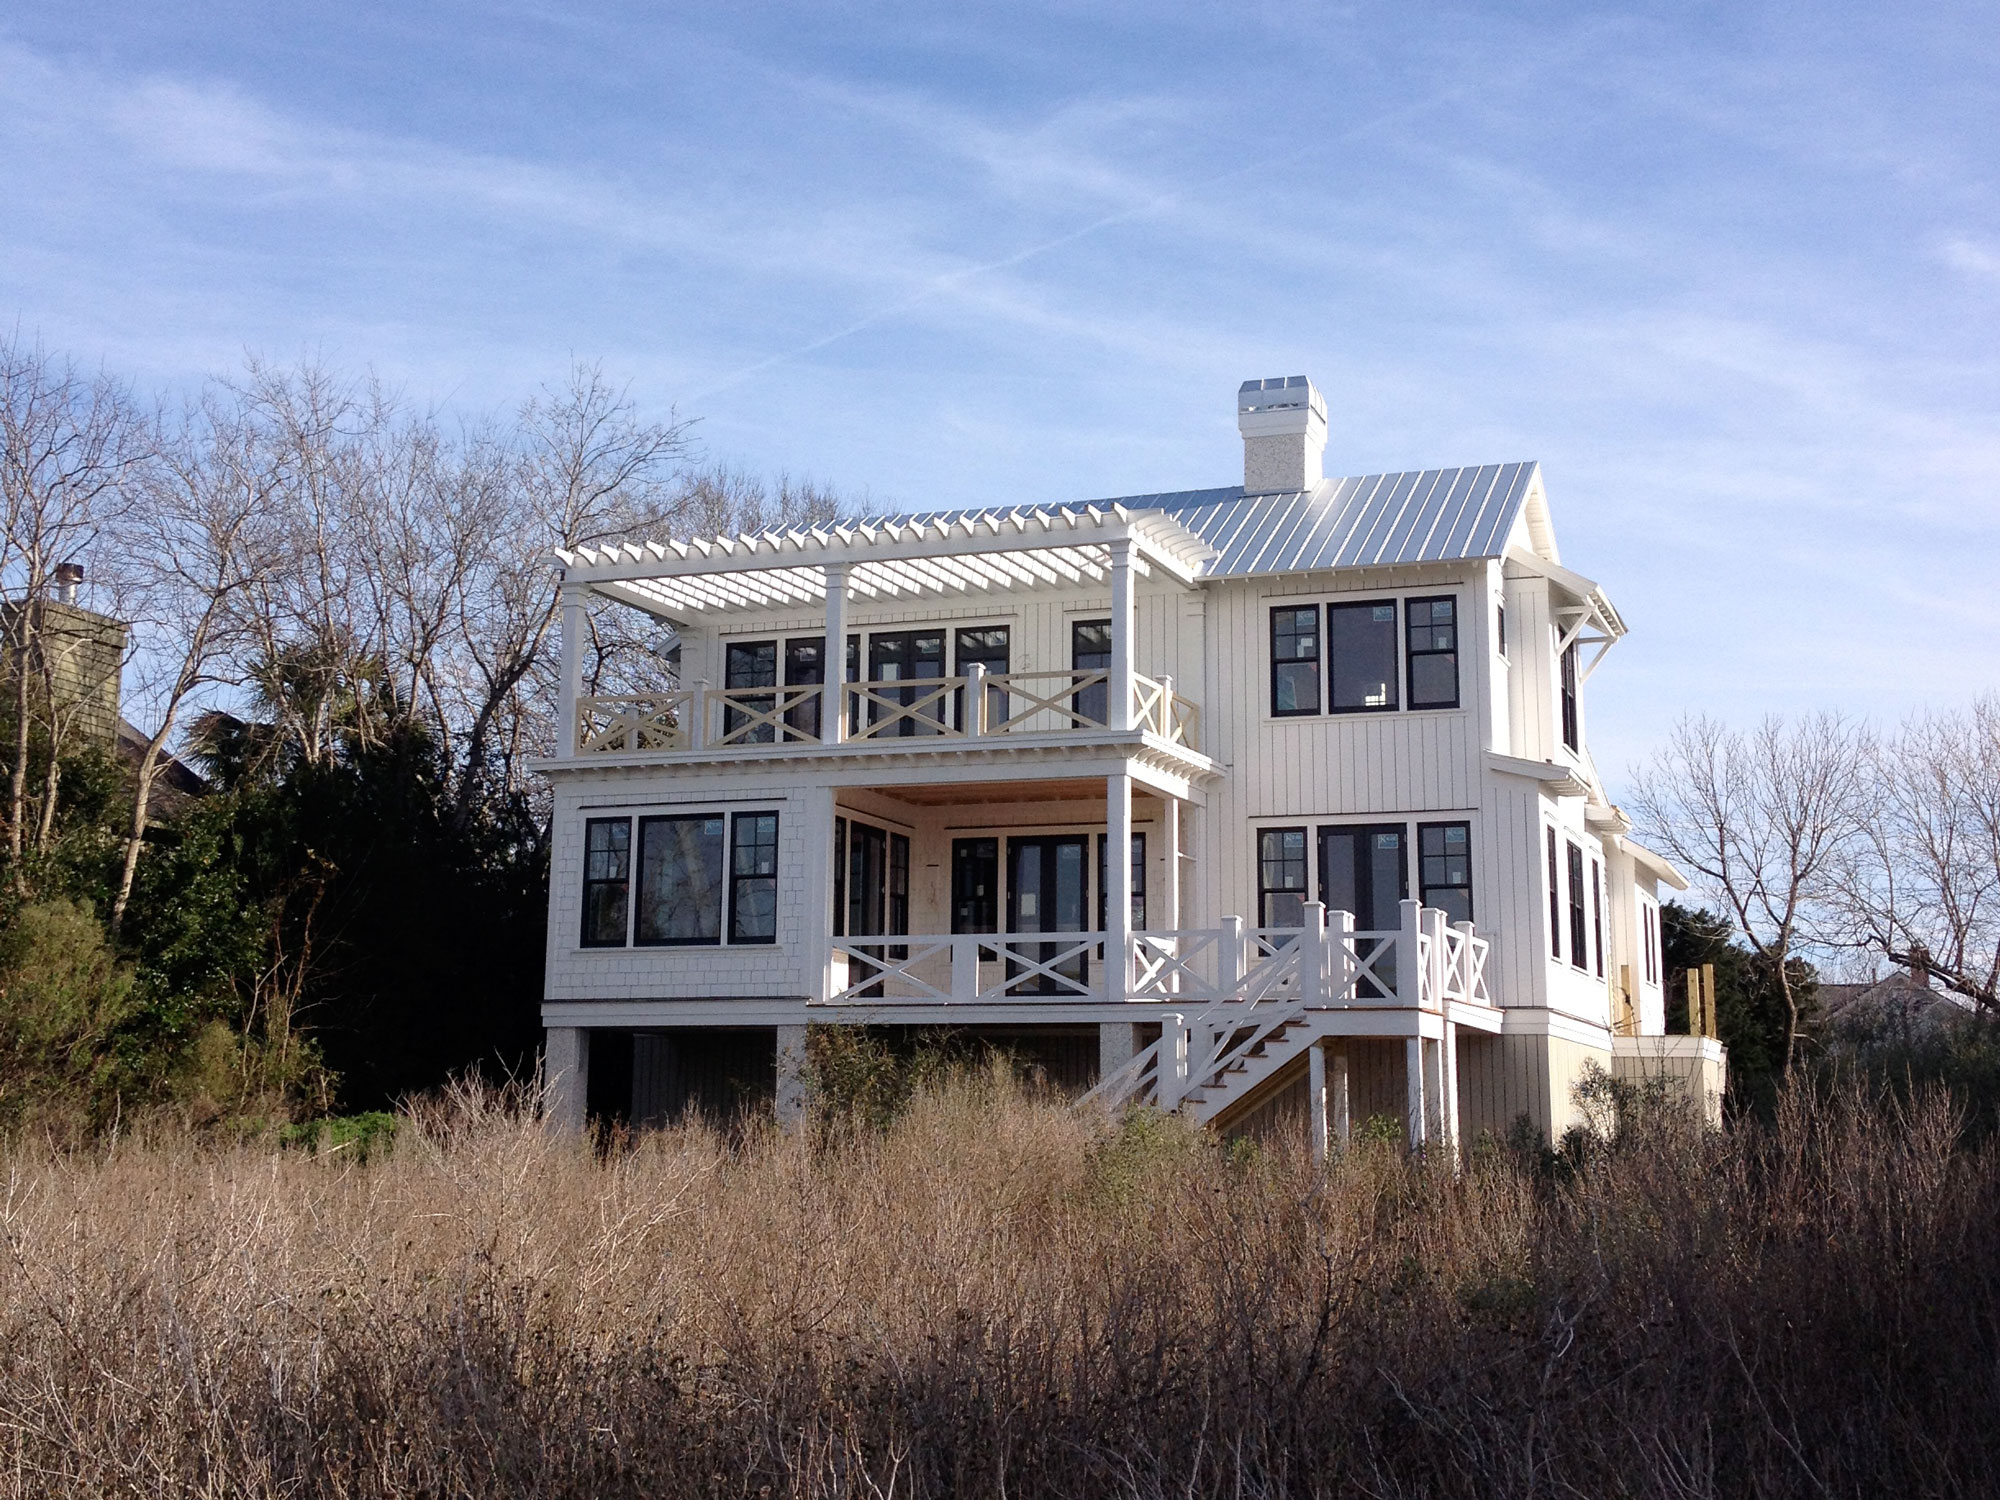 Backside view of coastal home with porches and metal room